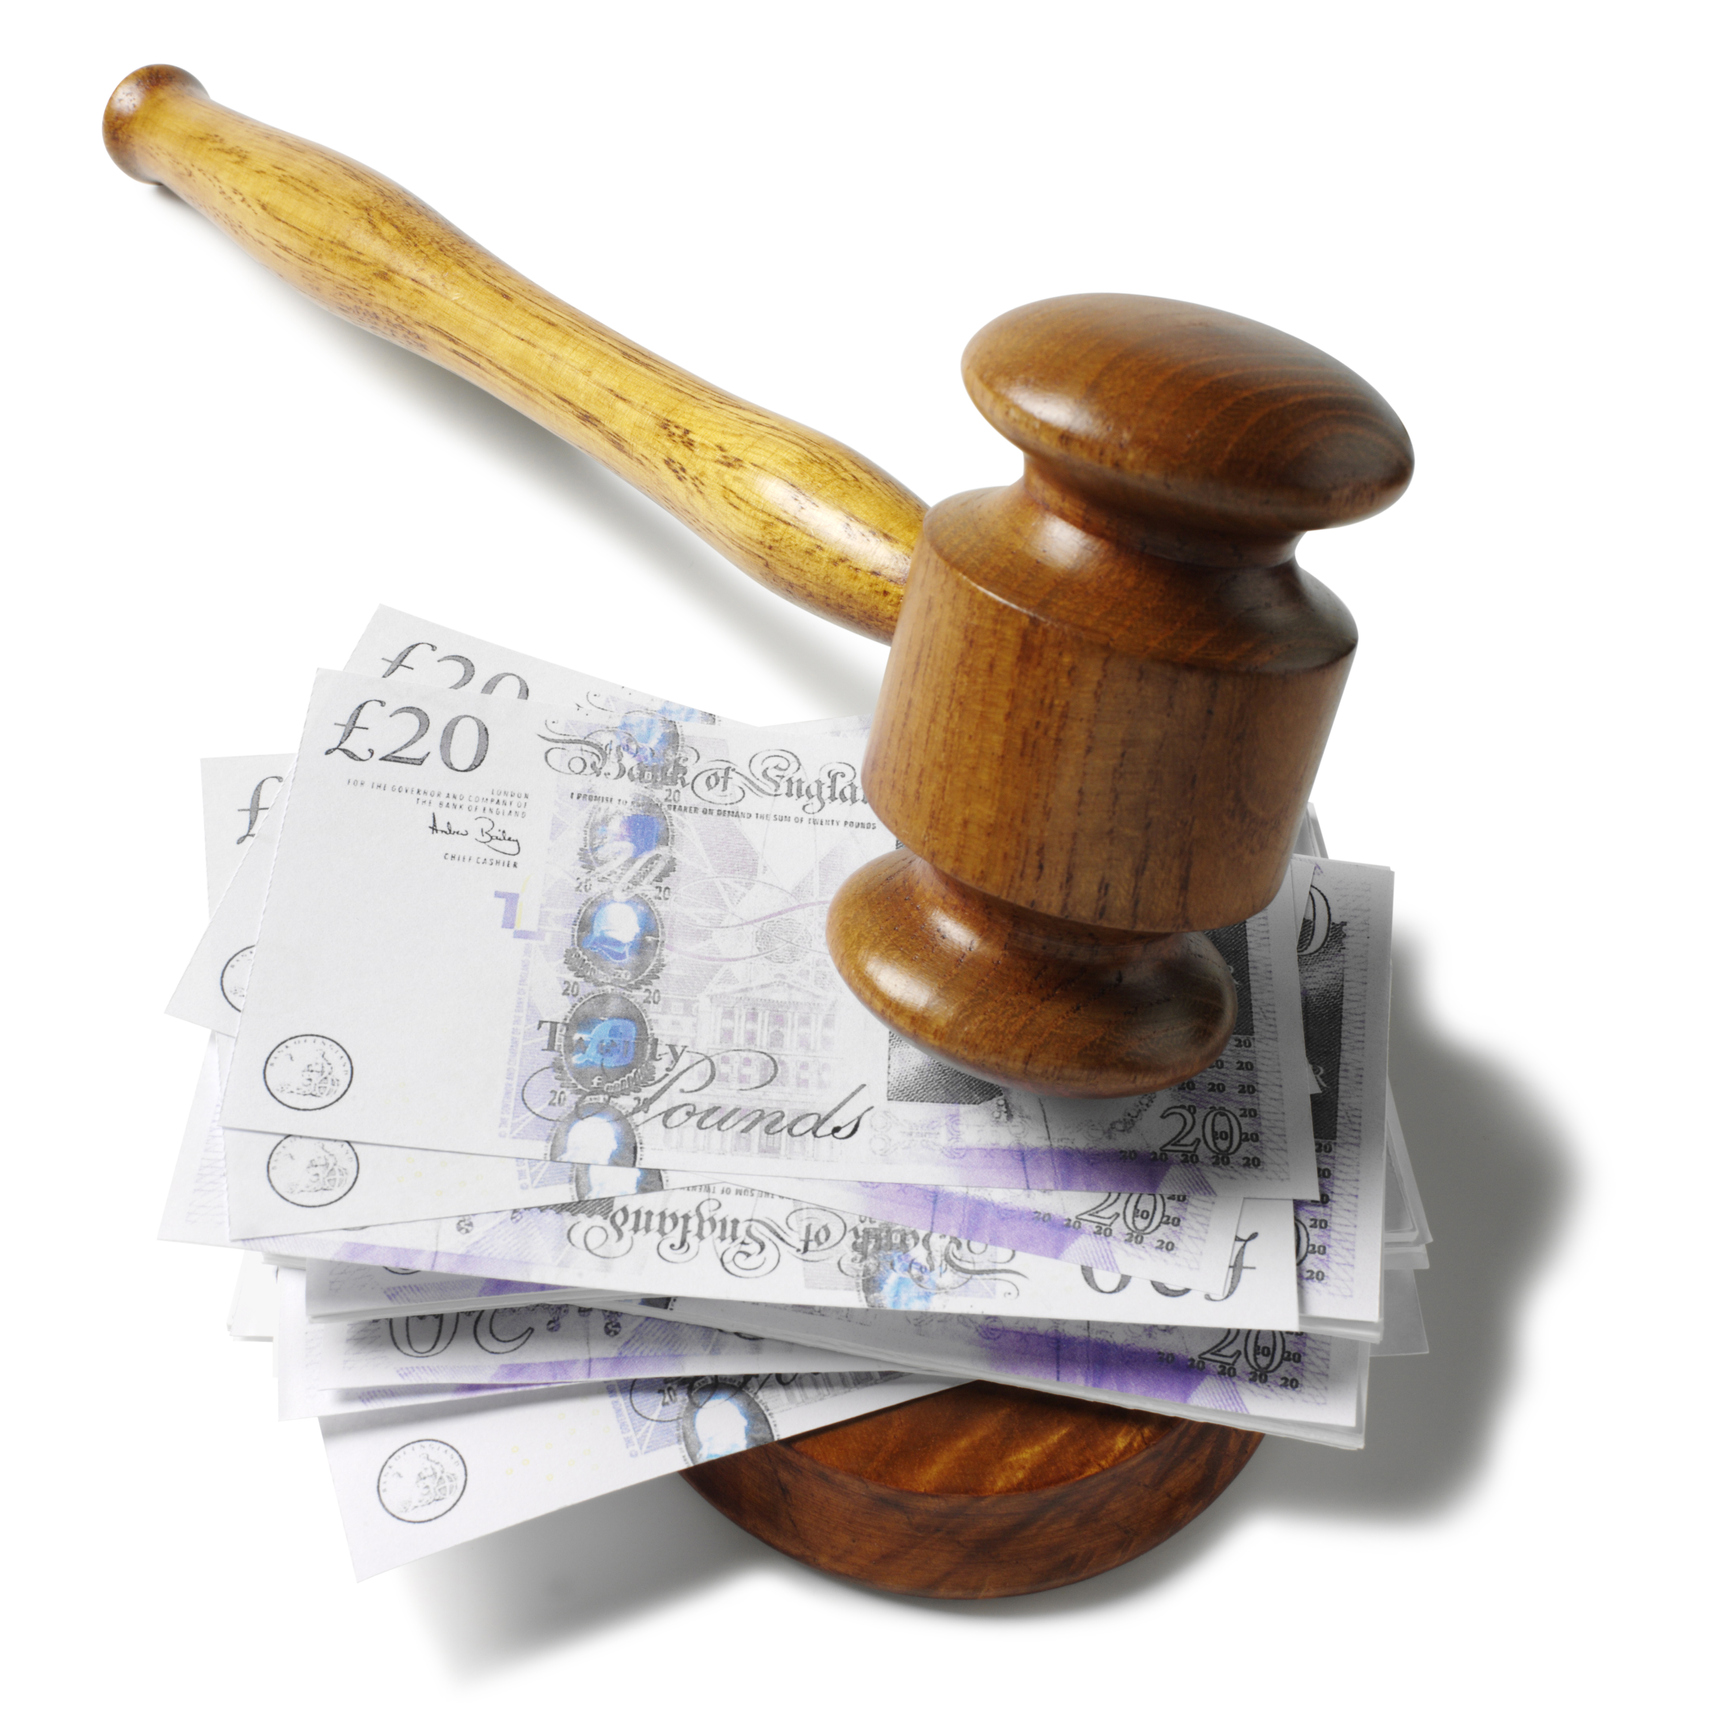 Photographic image of a Gavel small wooden hammer and £20 pound notes